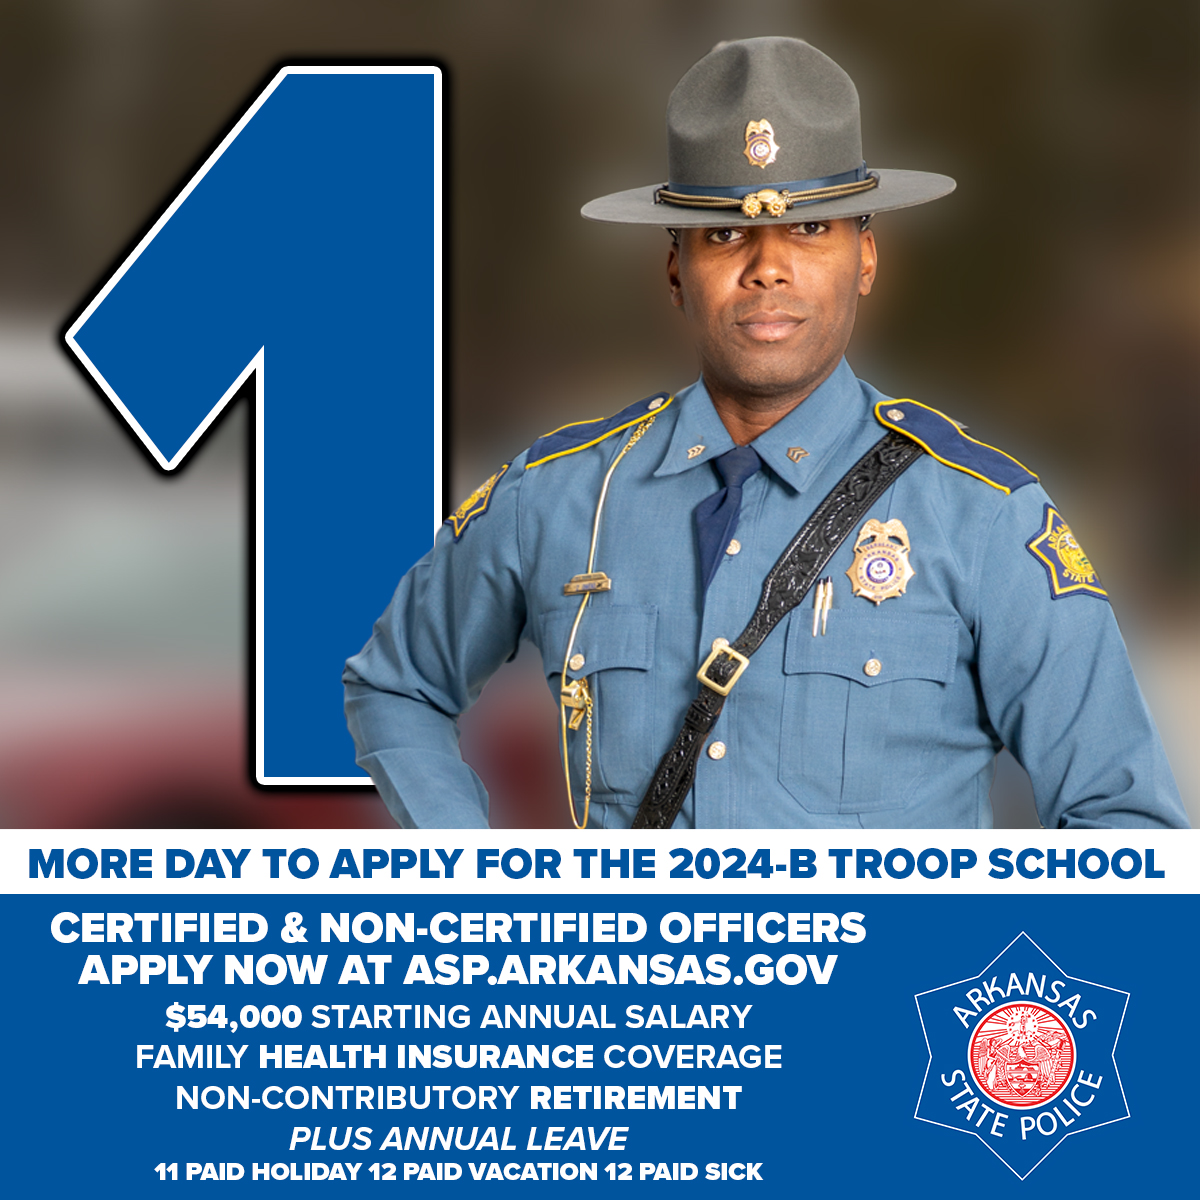 There's ONLY 1 MORE DAY left to apply for Troop School 2024-B! The school, scheduled to begin in October, is open to CERTIFIED AND NON-CERTIFIED applicants. Visit: bit.ly/ASPTroopSchool… for details on the application process. APPLICATION DEADLINE: 04/30/2024 – 11:59 p.m.